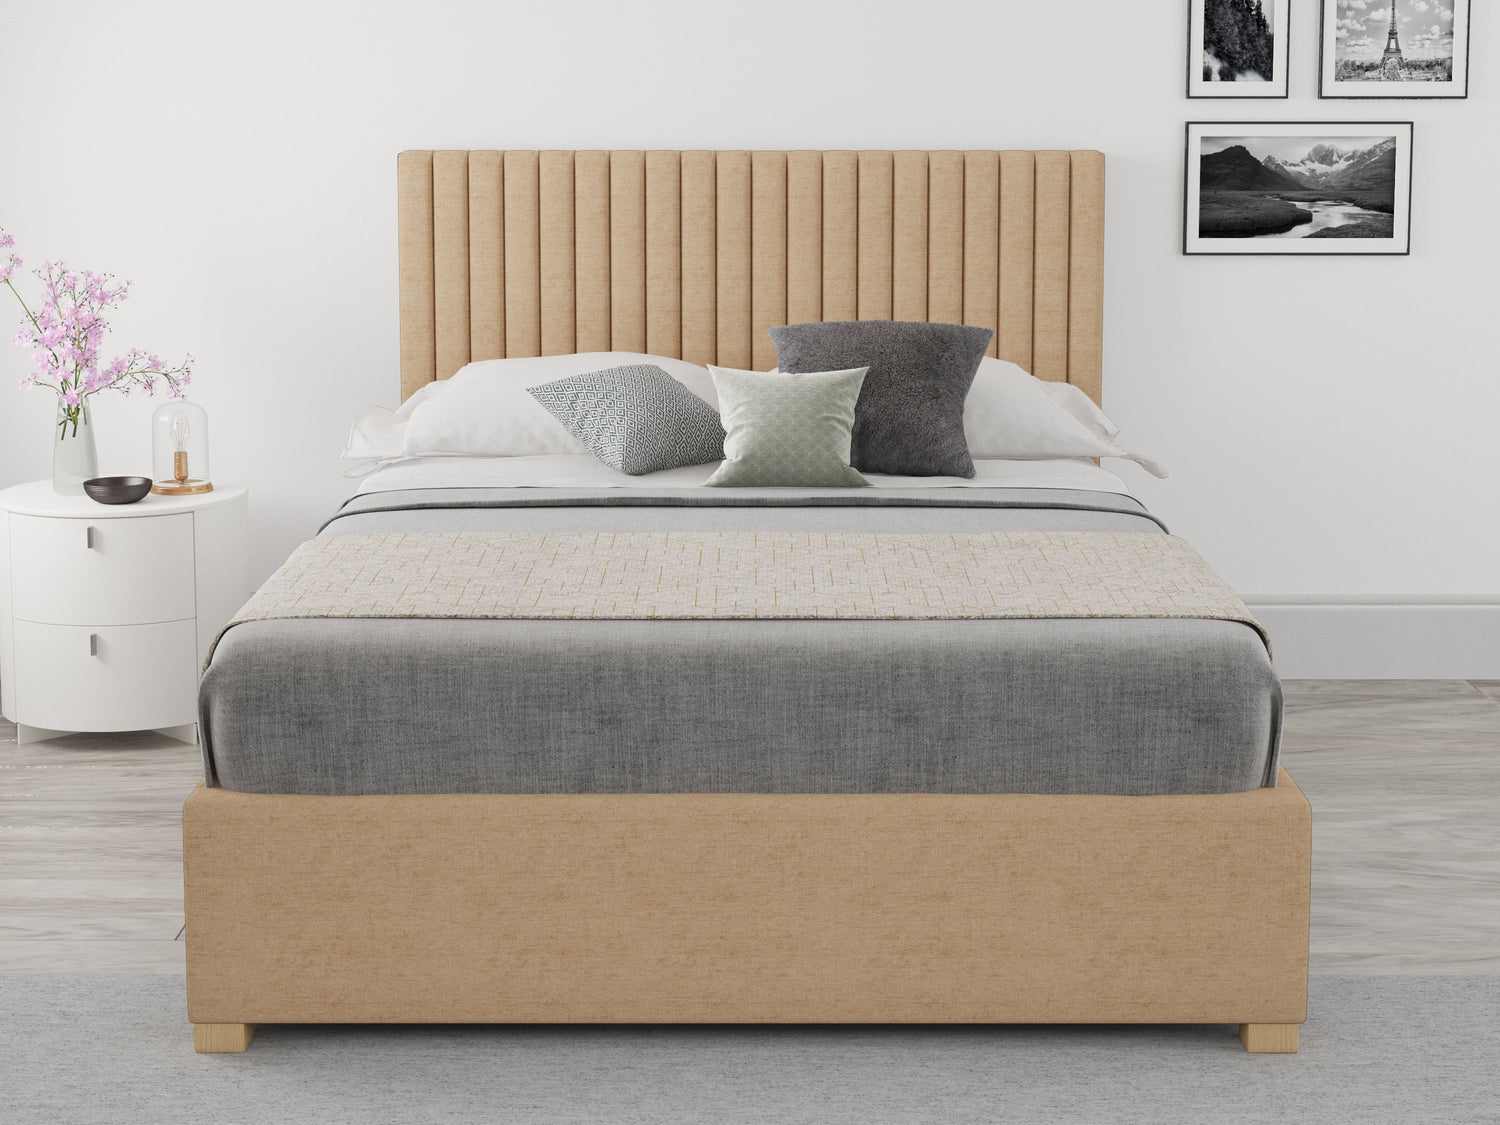 Better Glossop Champagne Beige Ottoman Bed-Better Bed Company 